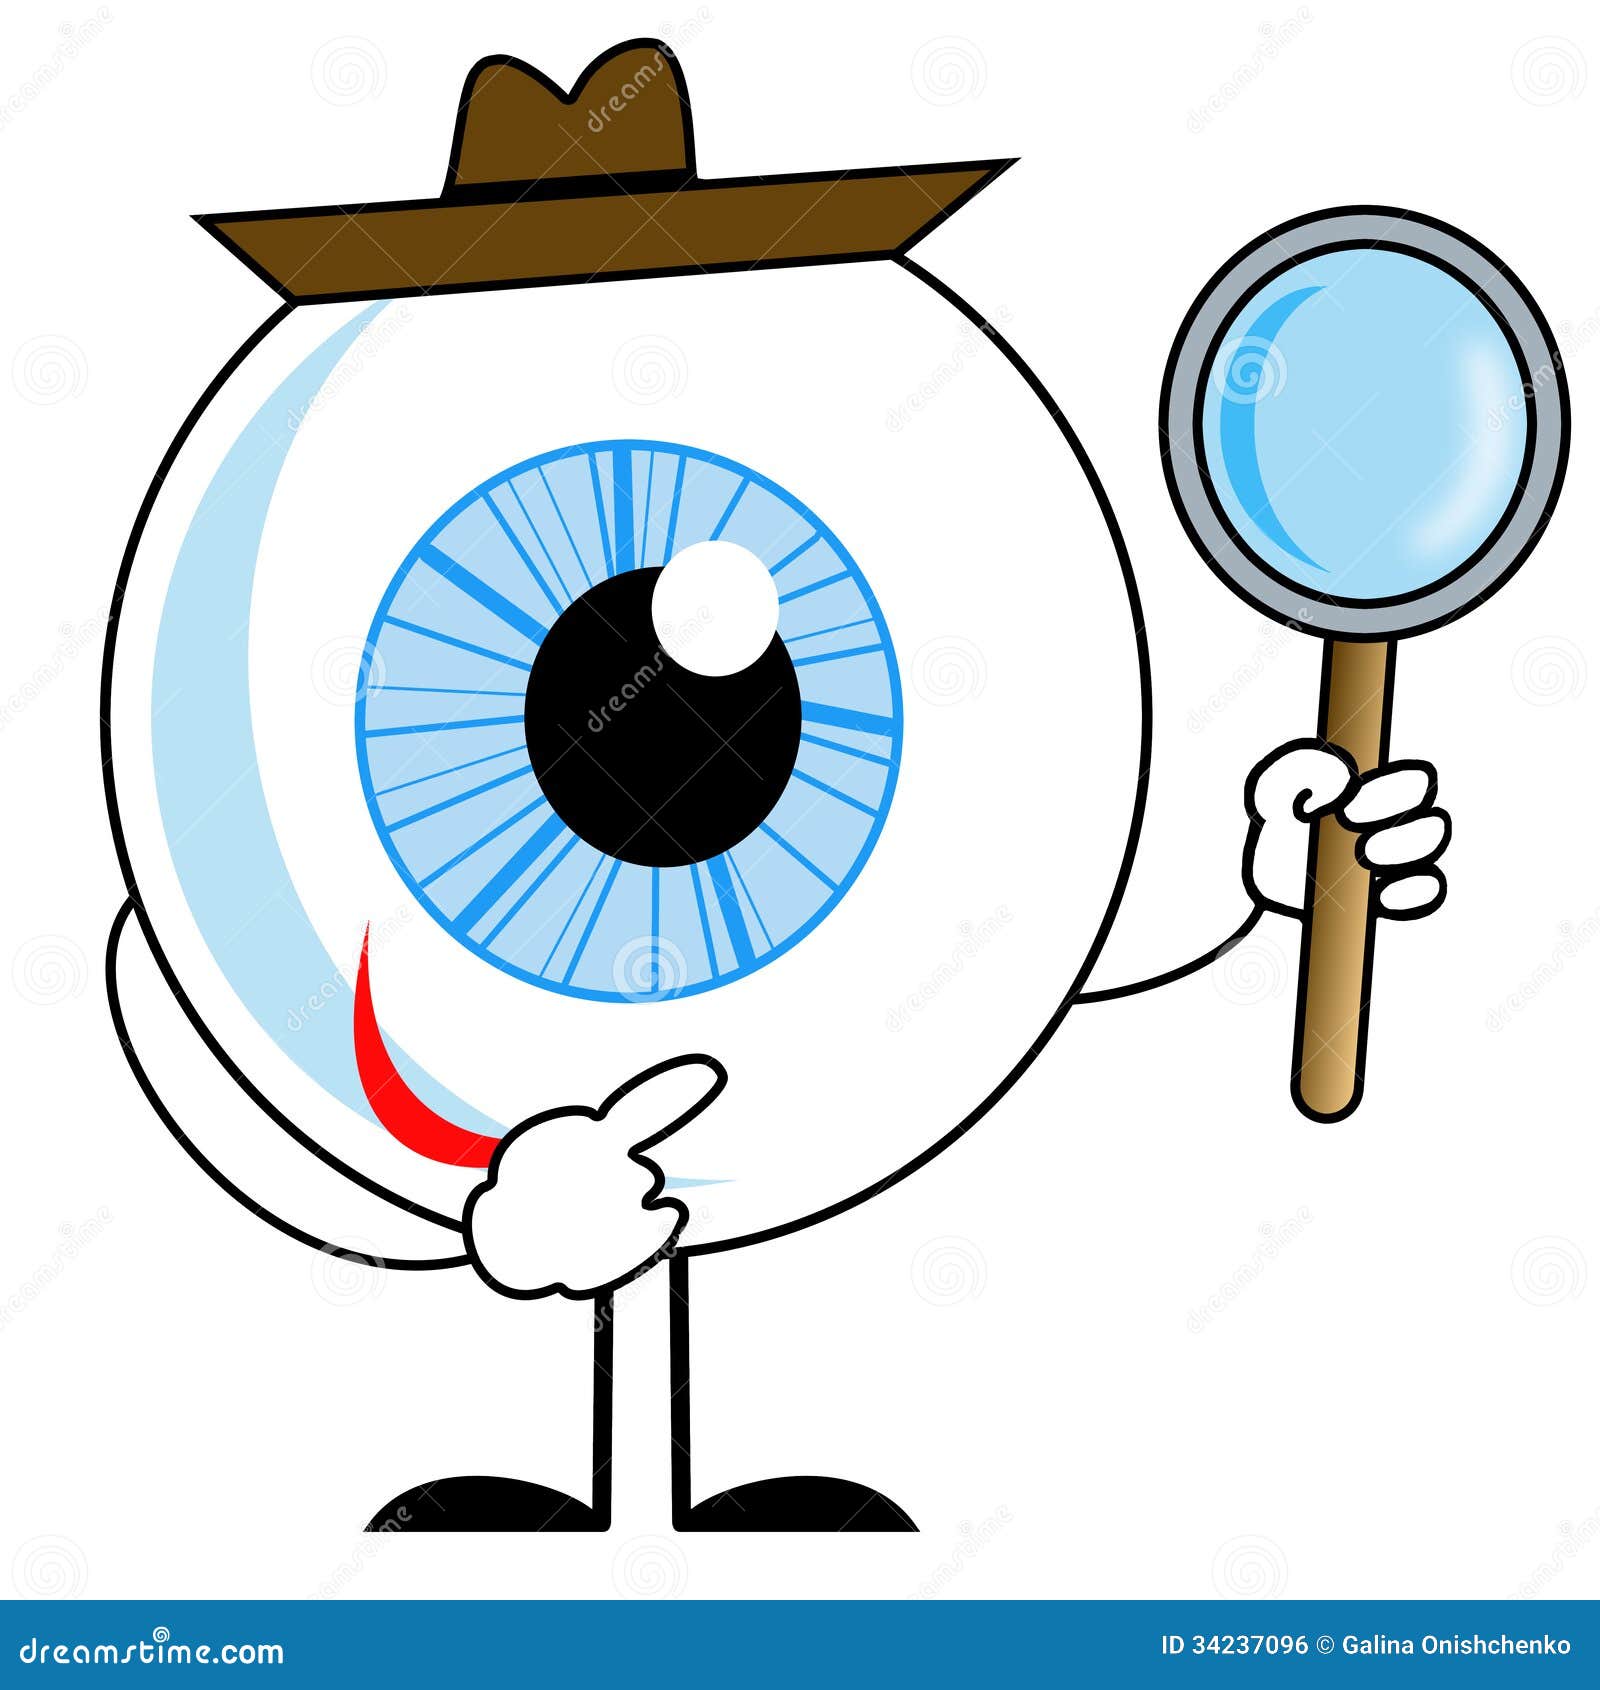 clipart of human eyes - photo #50